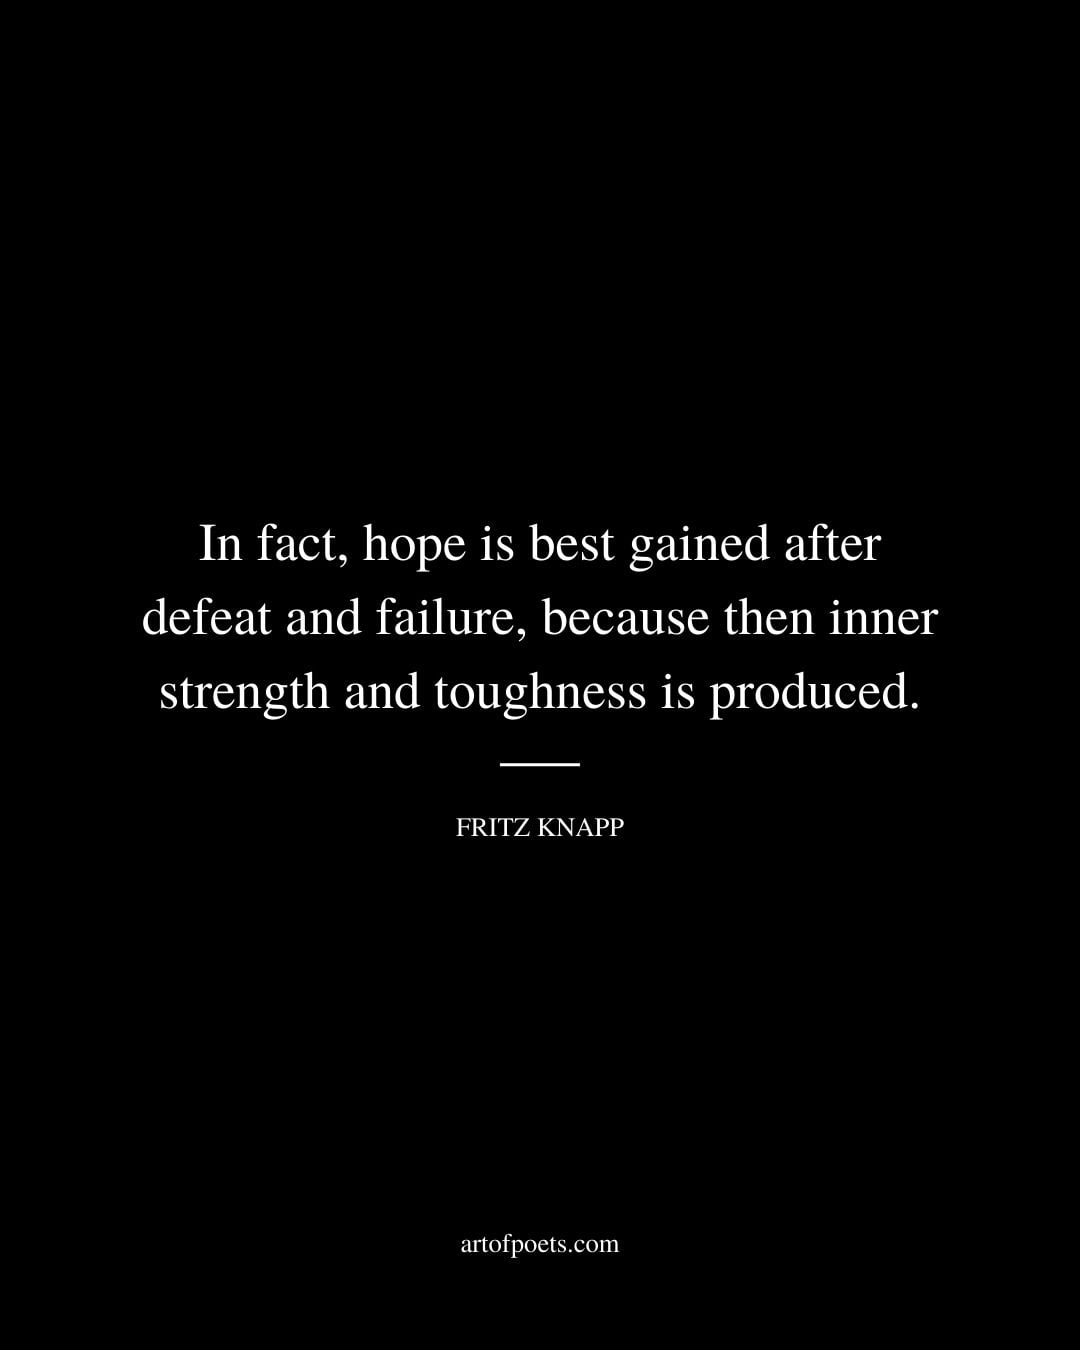 In fact hope is best gained after defeat and failure because then inner strength and toughness is produced. –Fritz Knapp